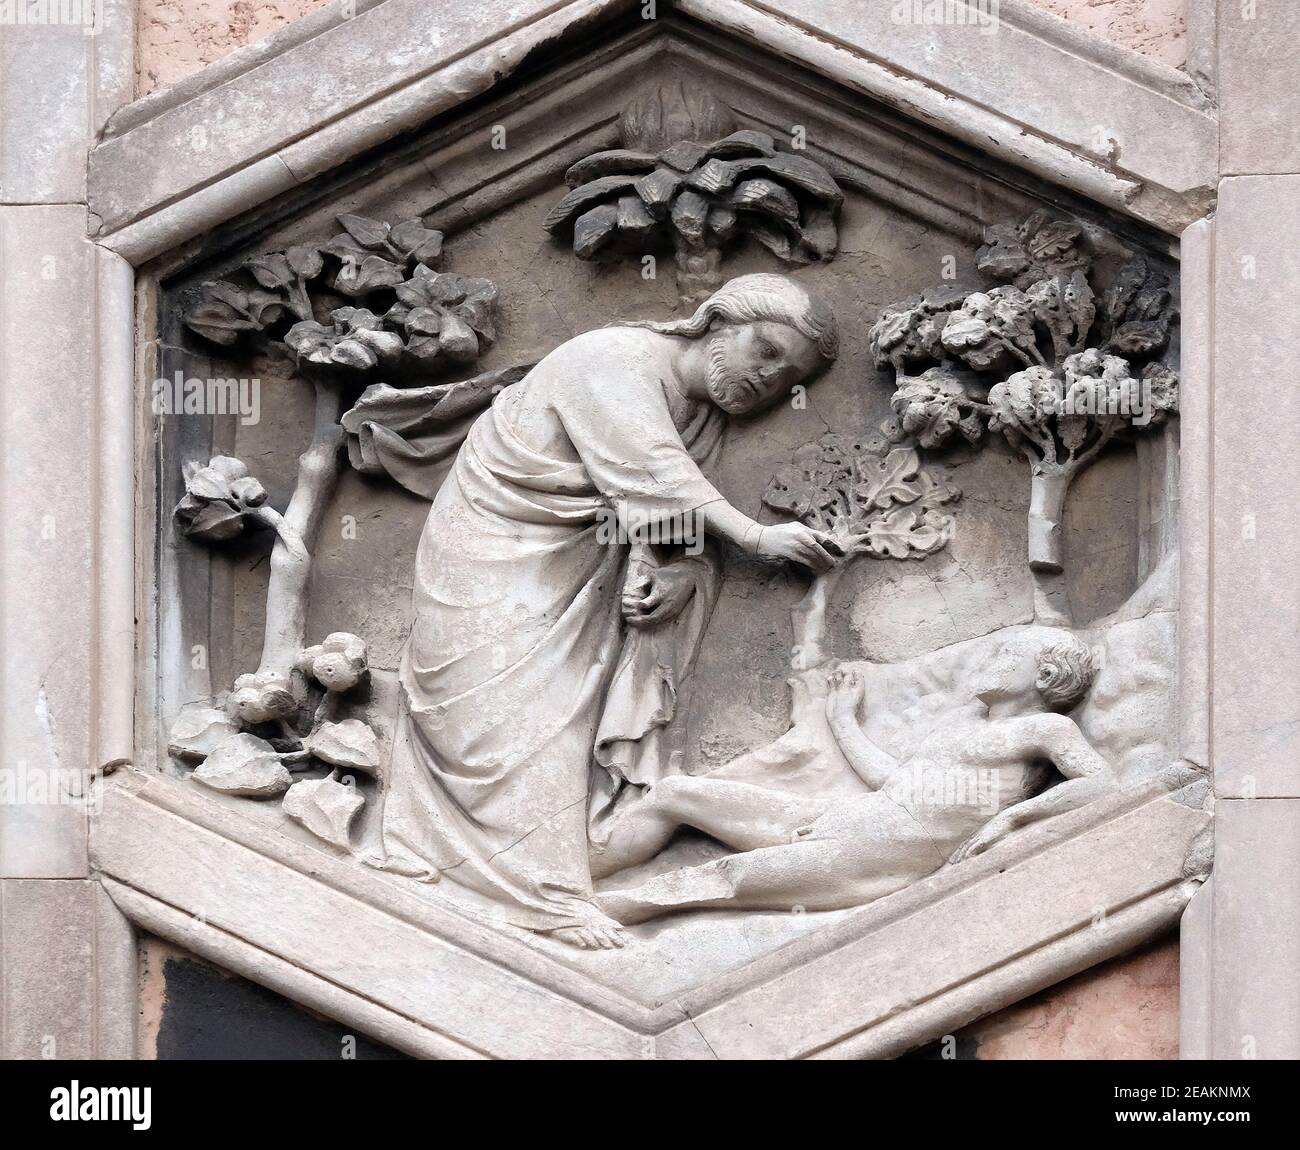 Creation of Adam, Andrea Pisano, 1334-36., Relief on Giotto Campanile of Cattedrale di Santa Maria del Fiore (Cathedral of Saint Mary of the Flower), Florence, Italy Stock Photo